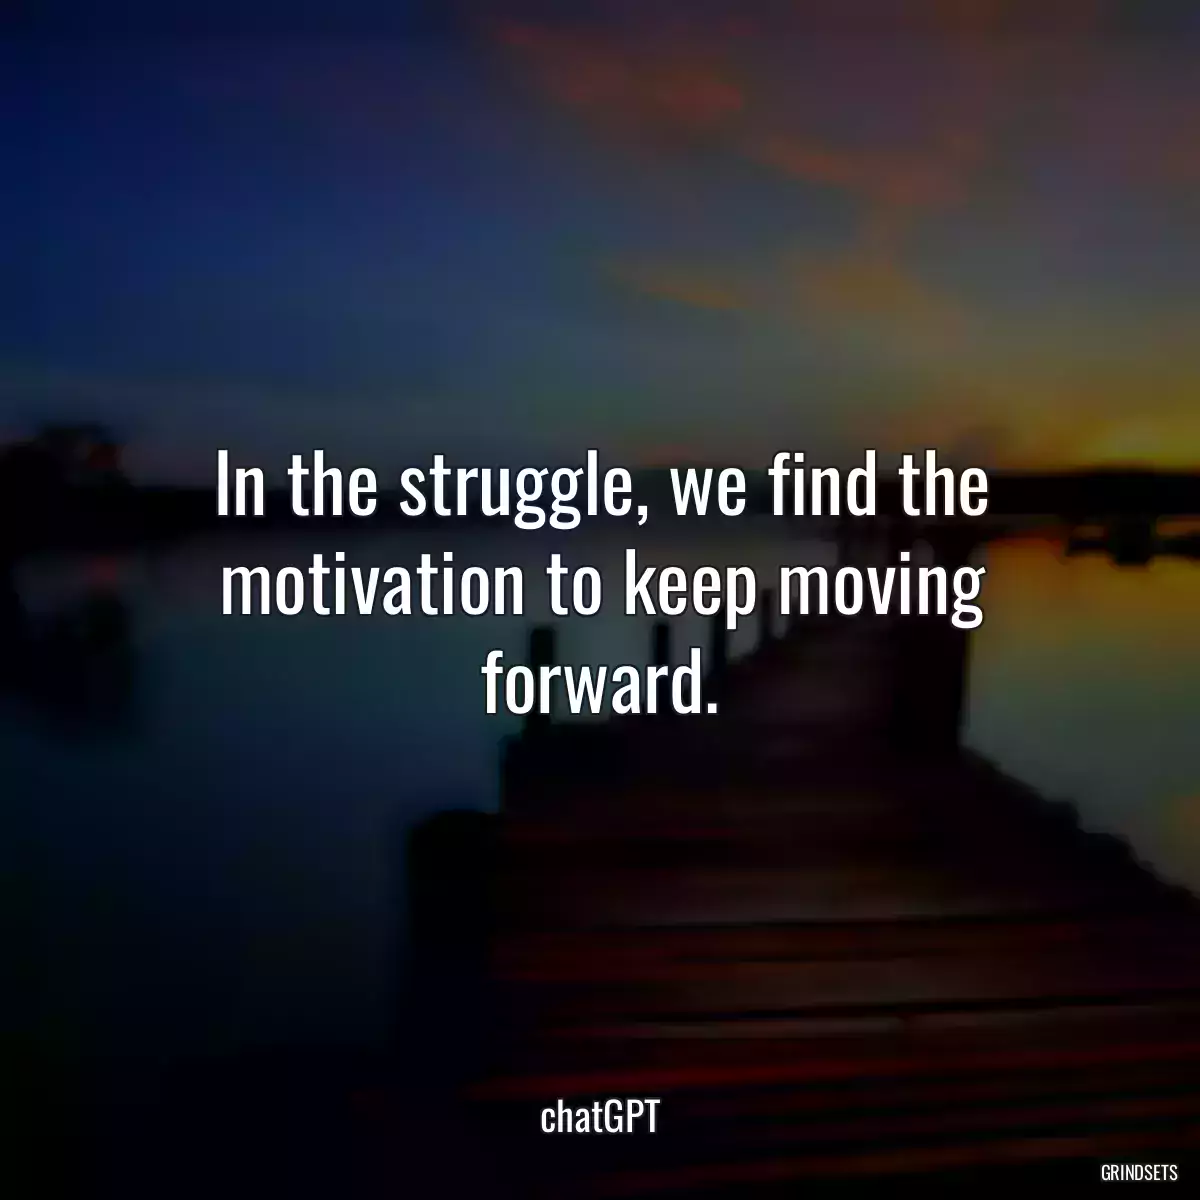 In the struggle, we find the motivation to keep moving forward.